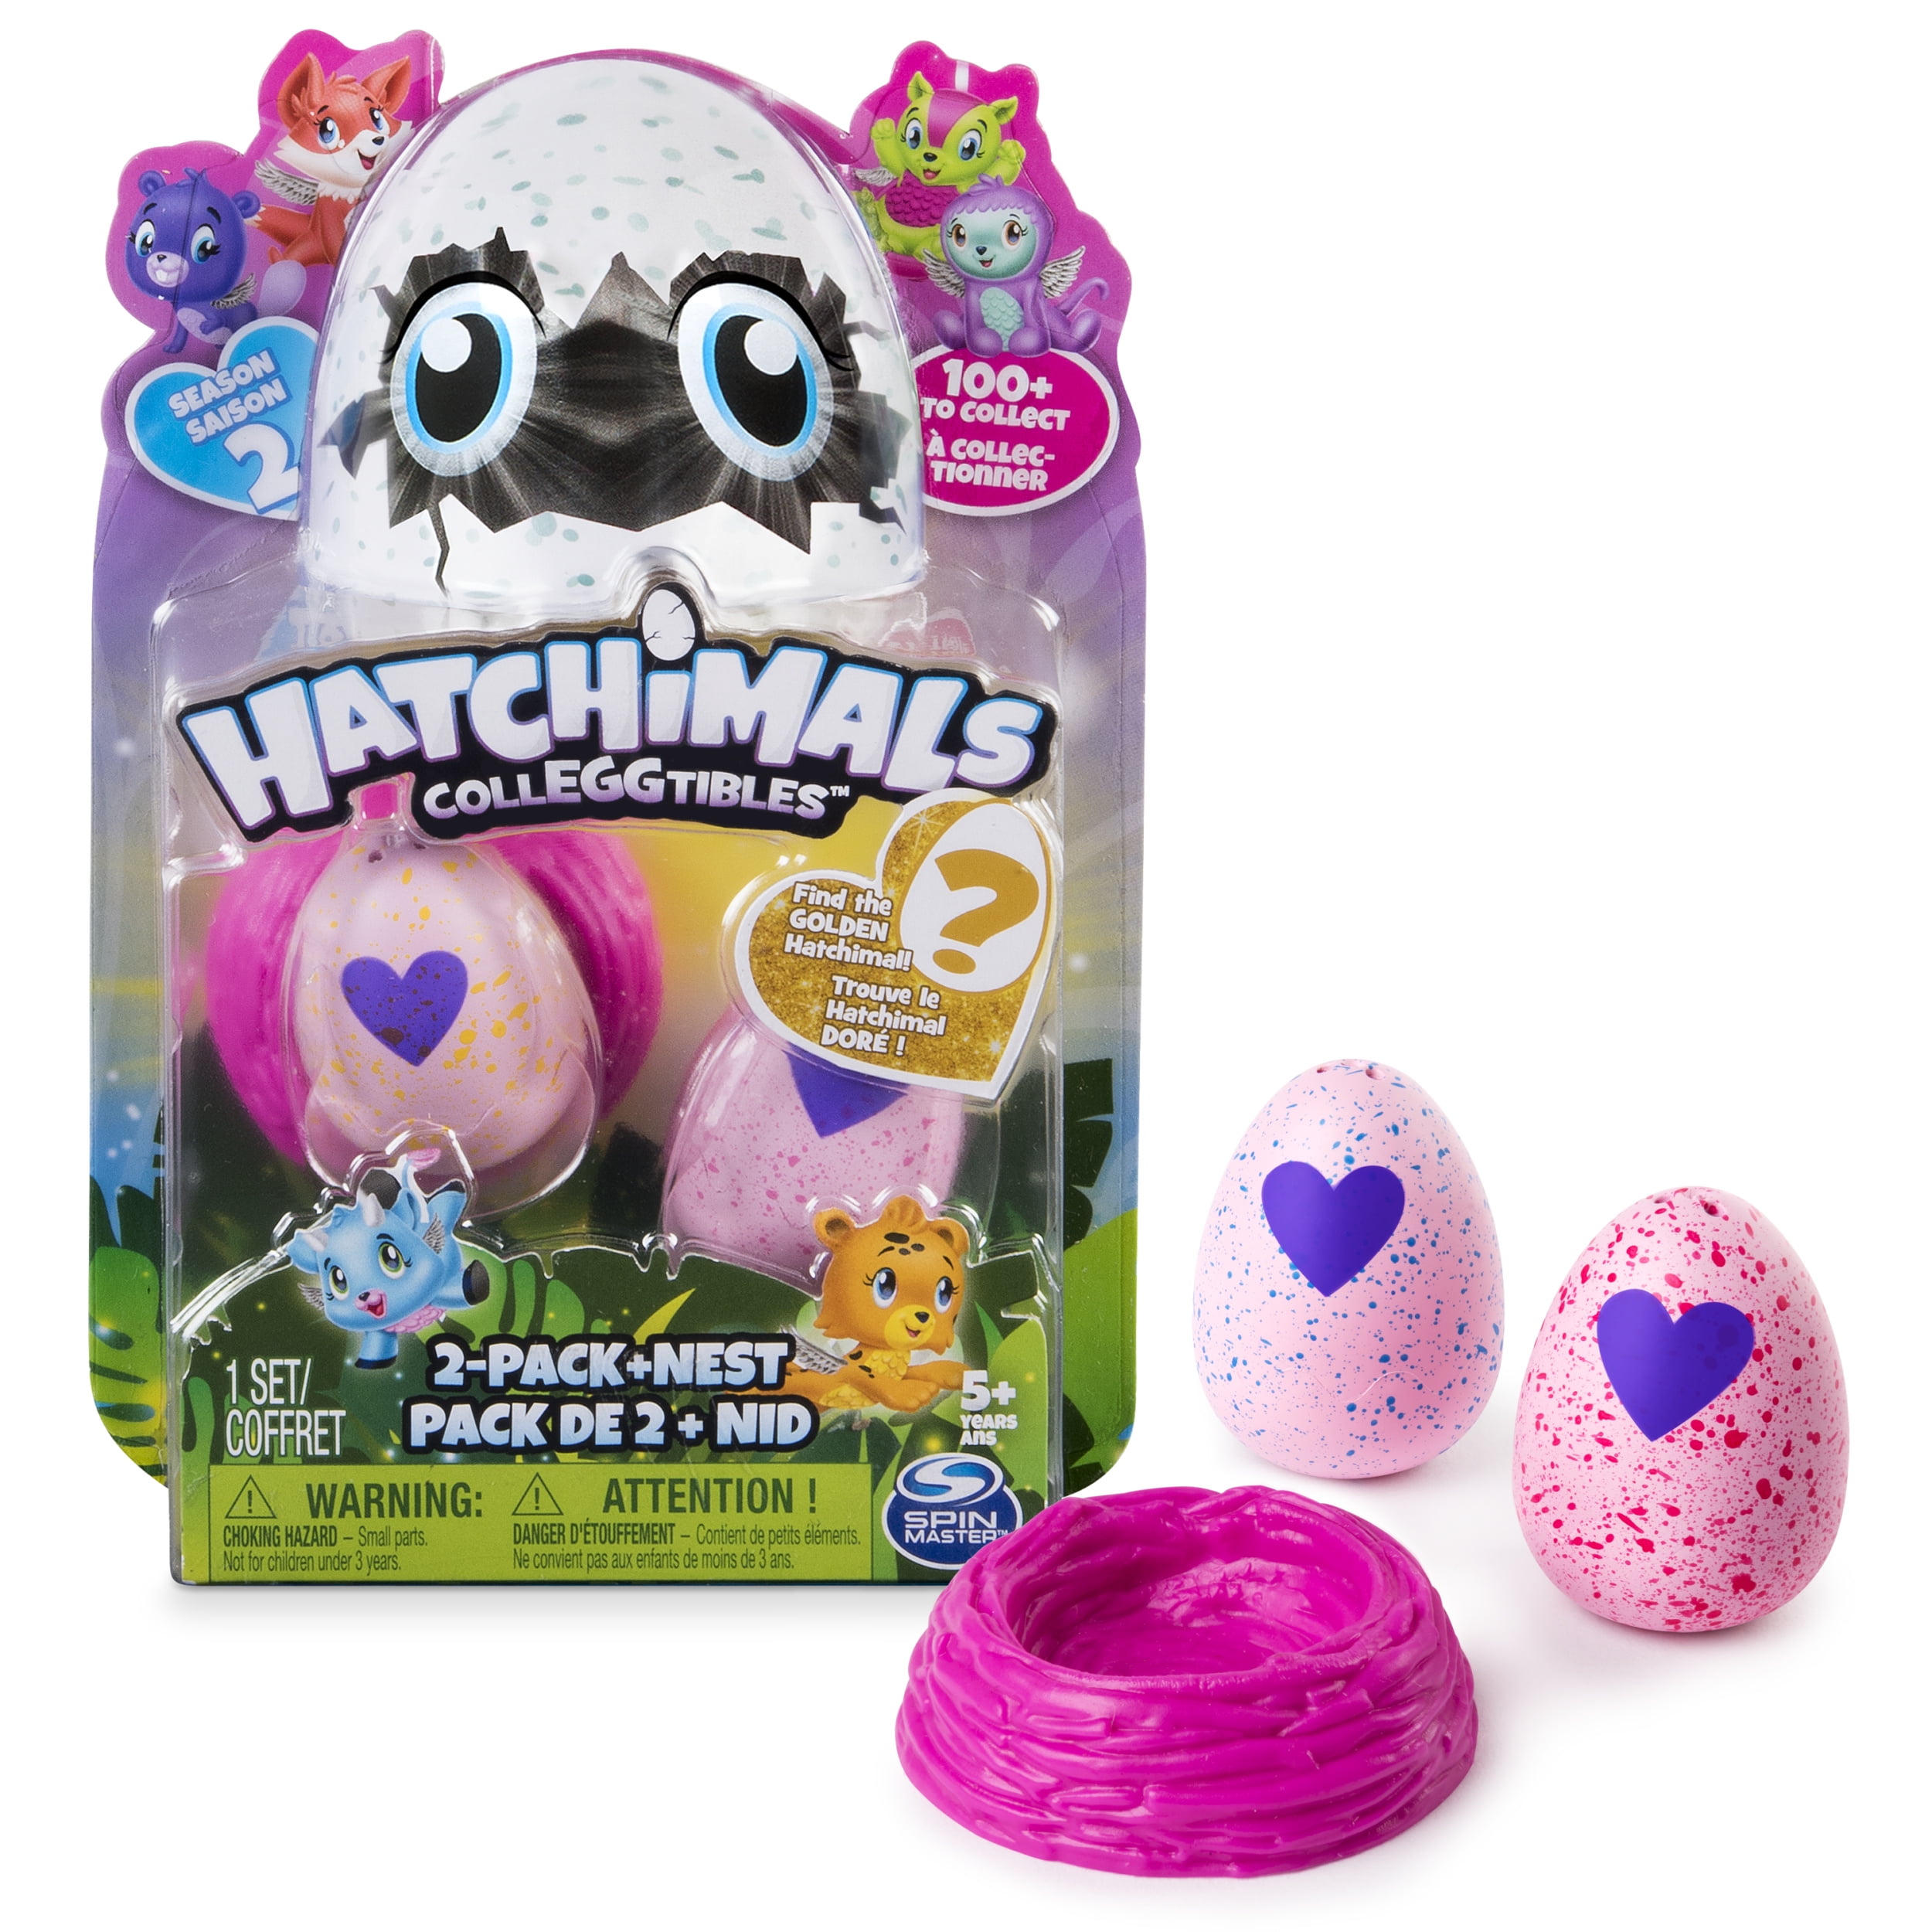 Details about   Hatchimals COLLEGGTIBLES BUNWEE TARGET EXCLUSIVE COMPLETE SET UNHATCHED